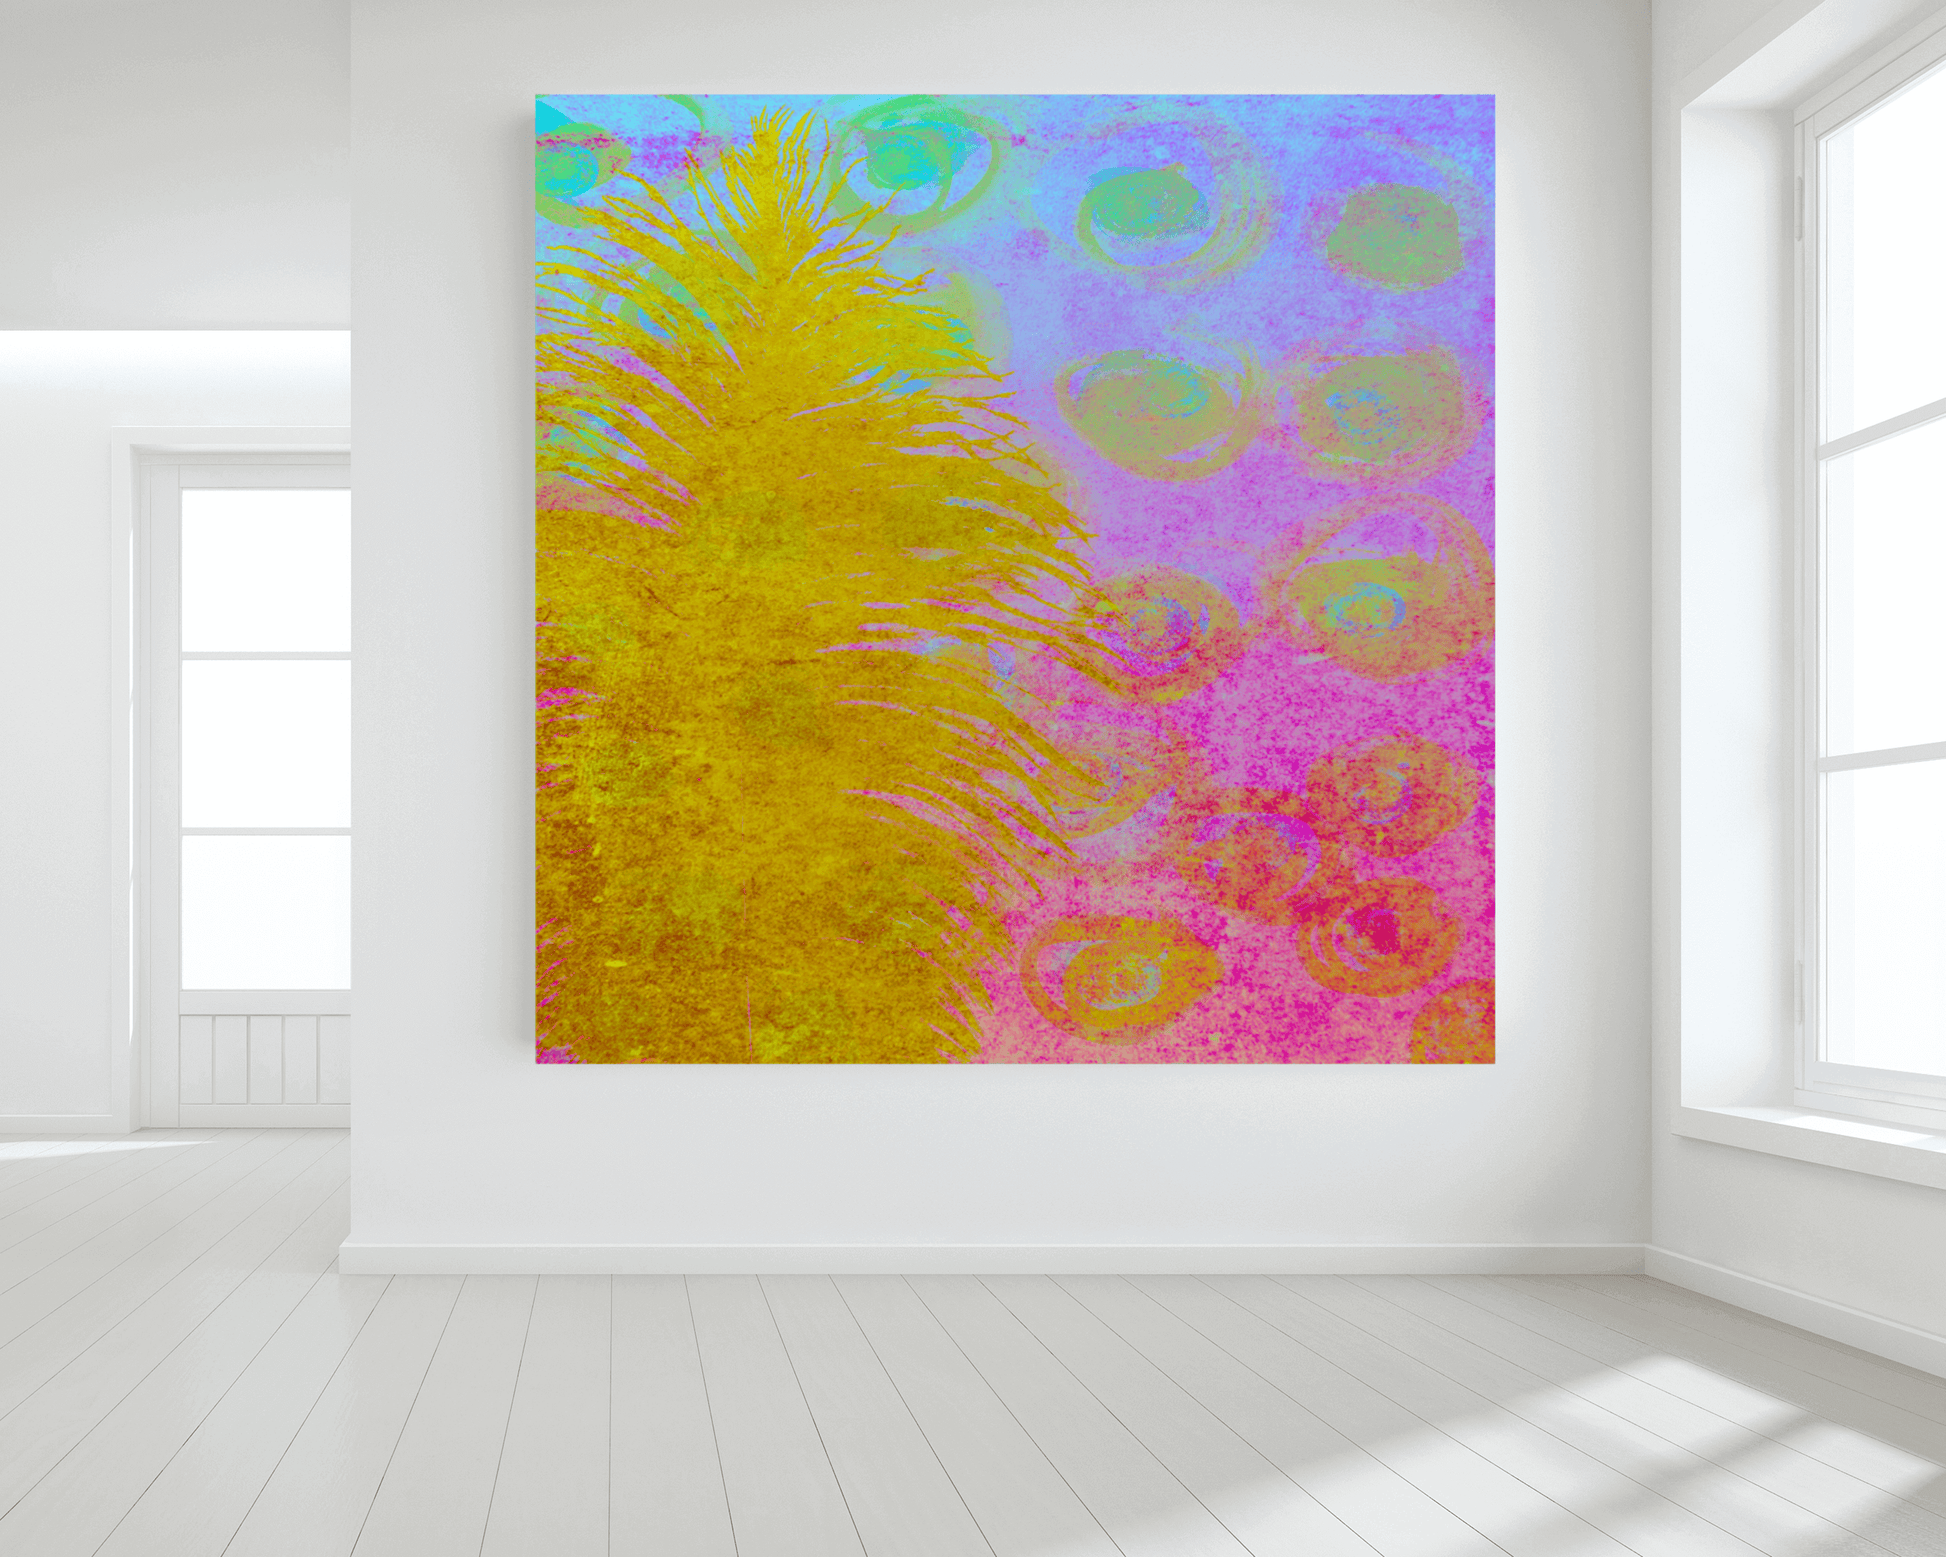 Golden Feather Pink and Blue “Fantasia” Abstract Art Canvas Print Wall Art Large Canvas on Wall